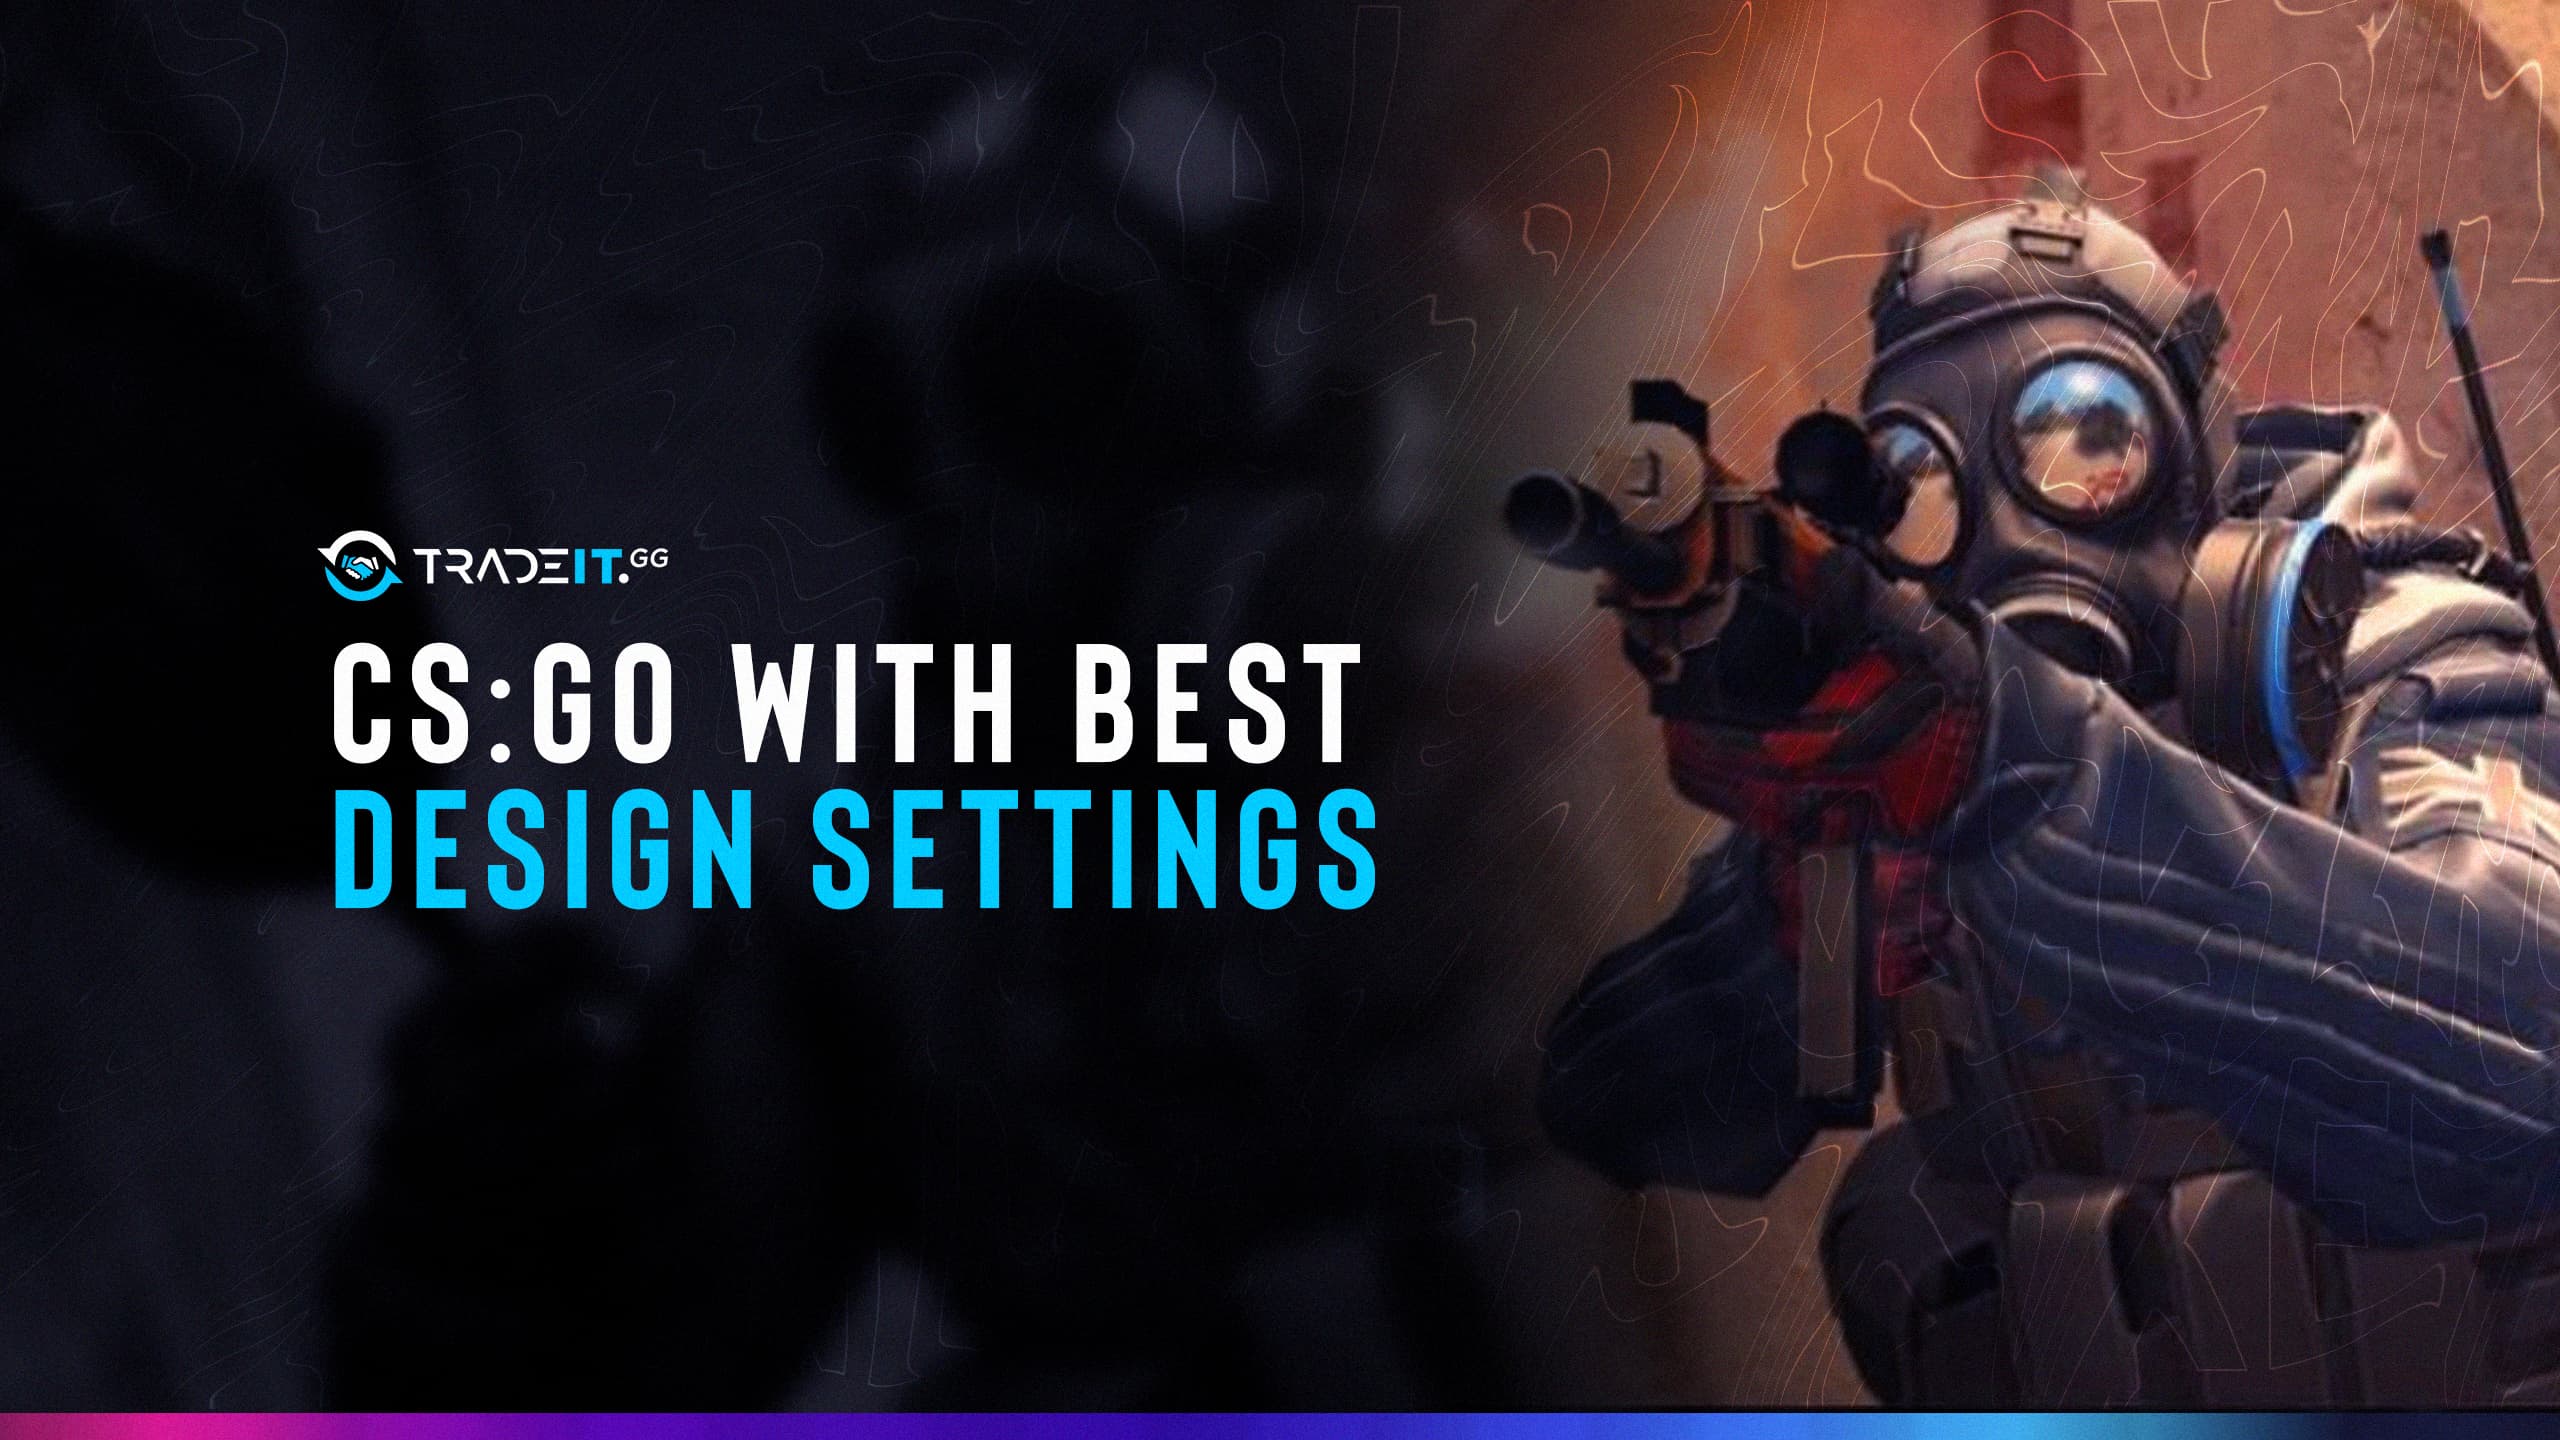 Playing CSGO Using the Best Settings